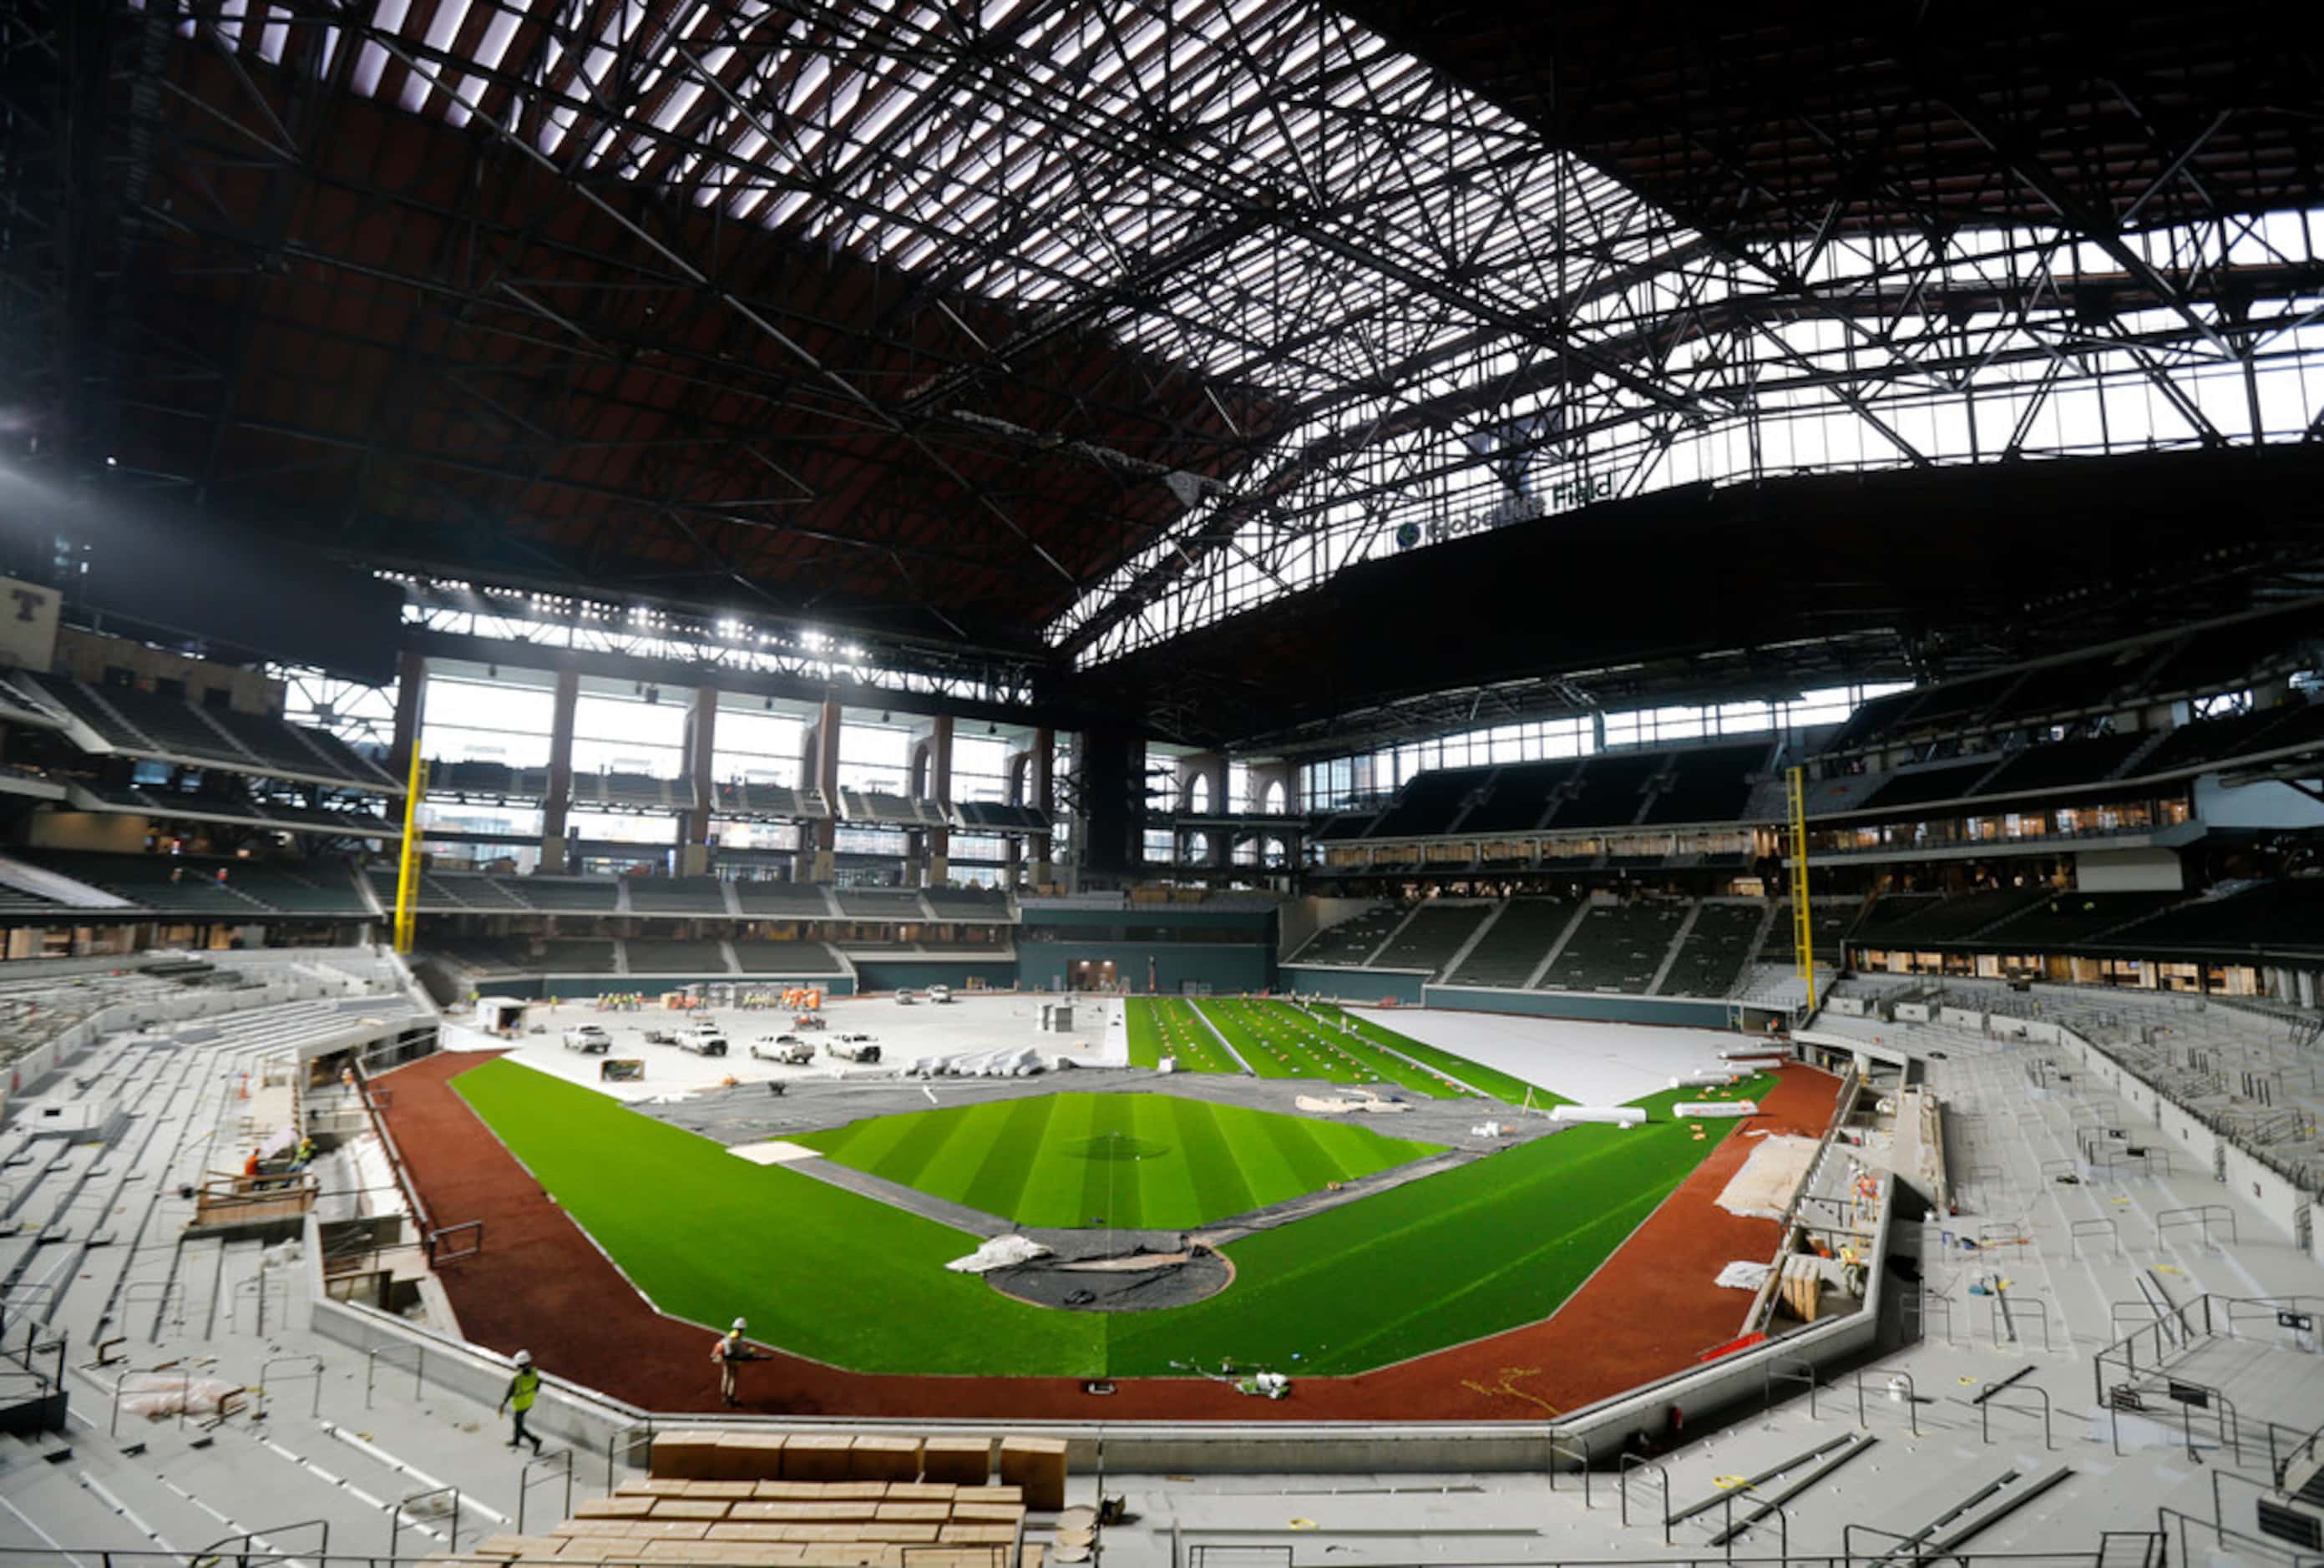 The artificial turf by Shaw Sports Turf and infield dirt are being installed at Globe Life...